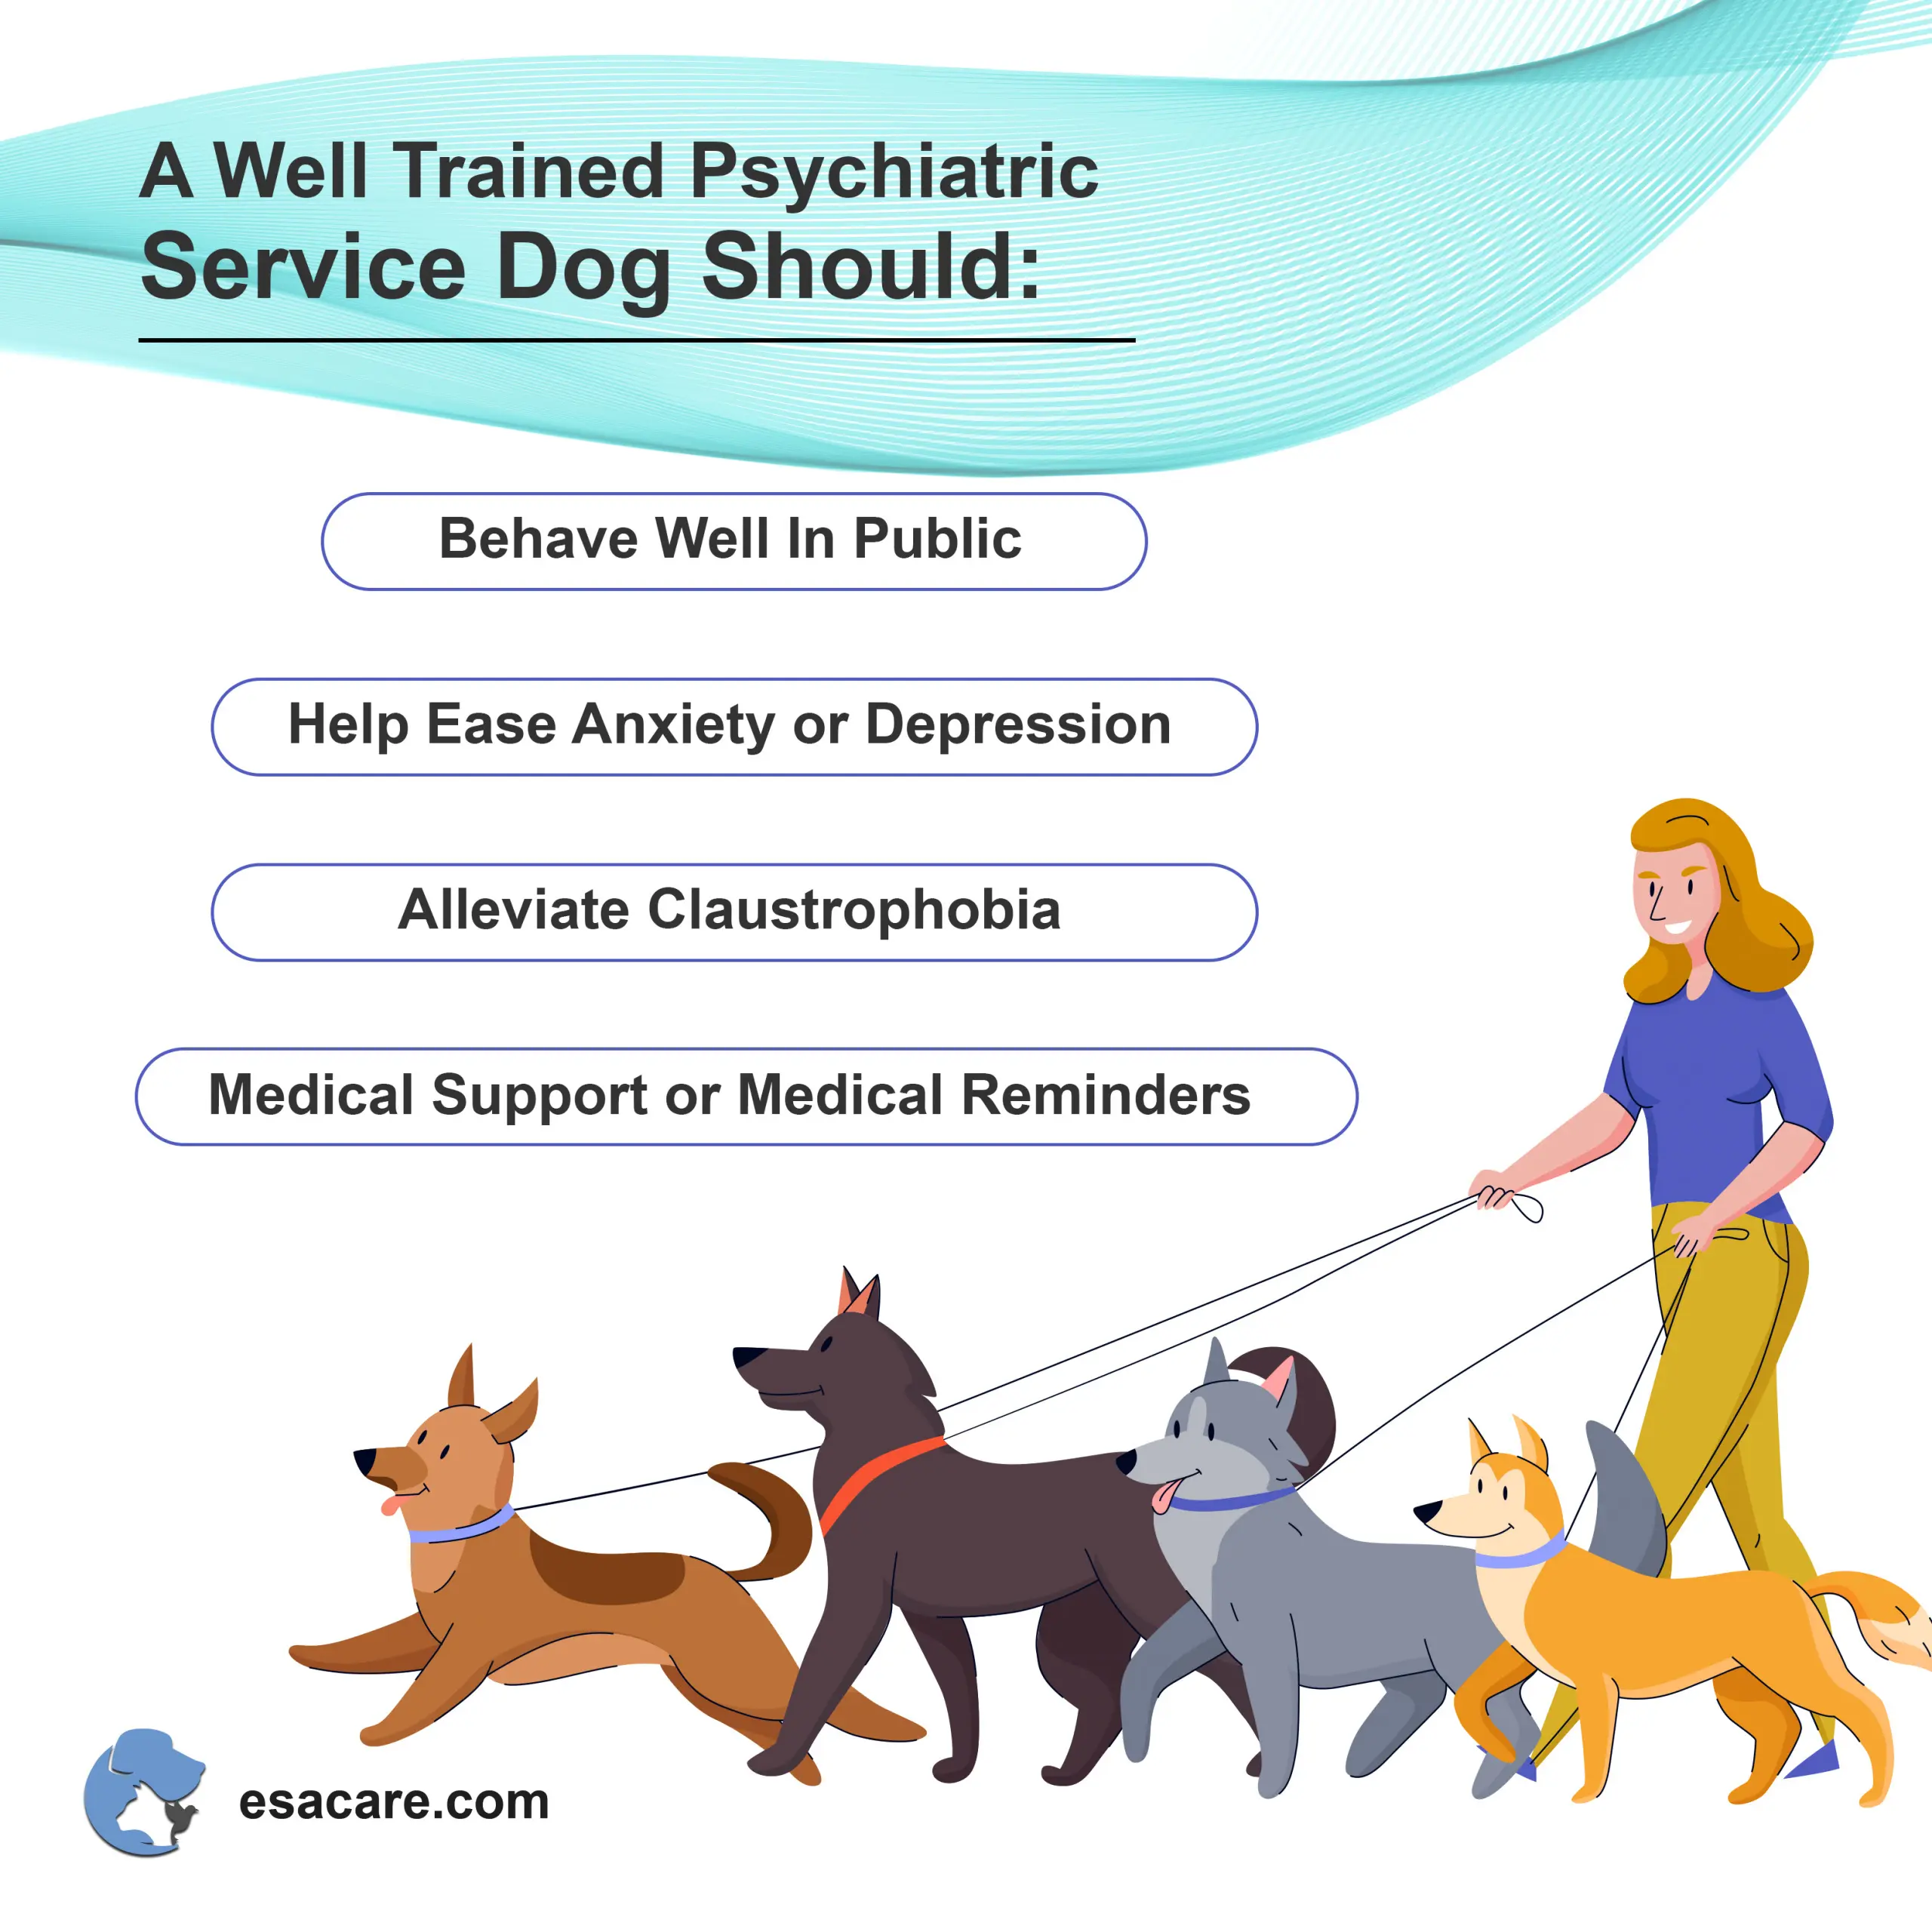 are service dogs allowed to help with anxiety